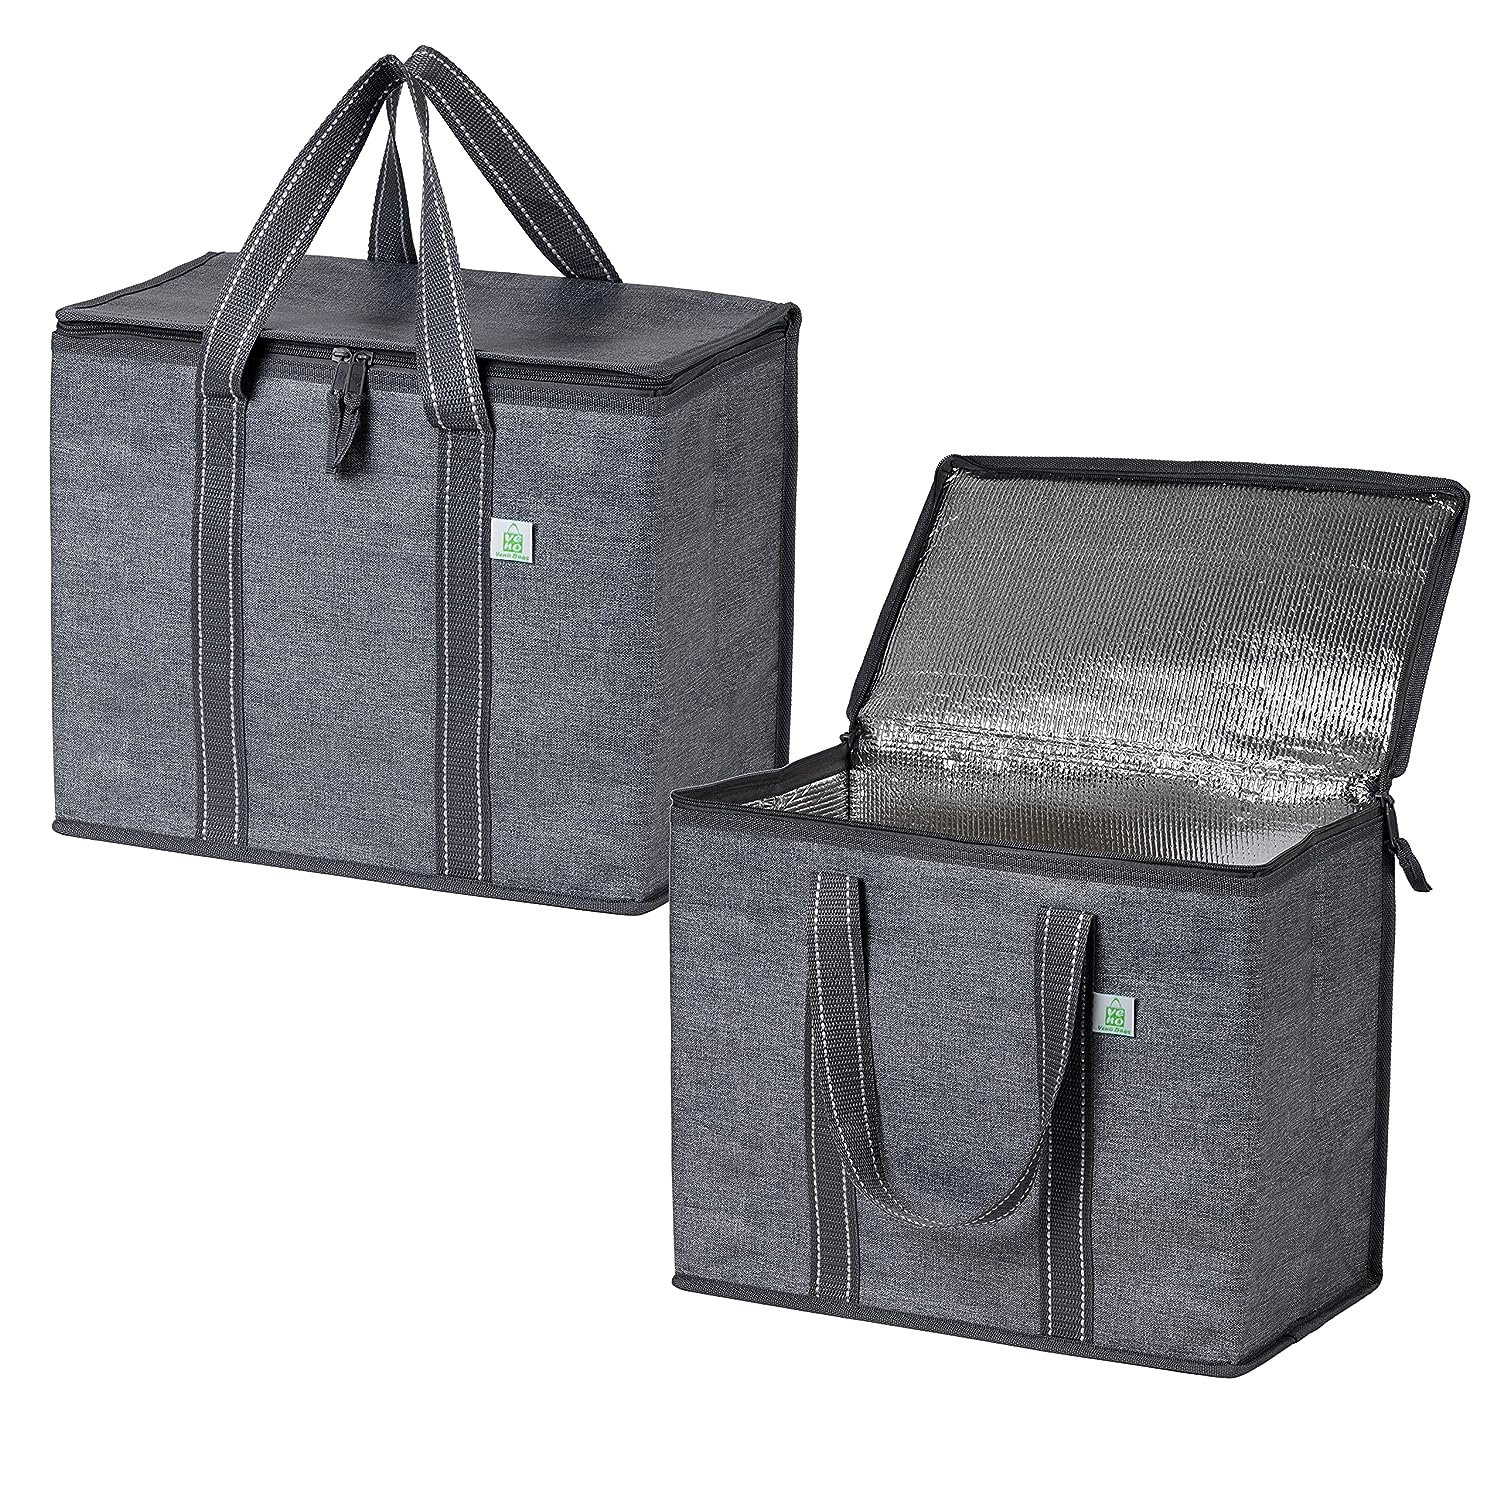 VENO 2 Pack Insulated Reusable Grocery Bag w/Cardboard [...]